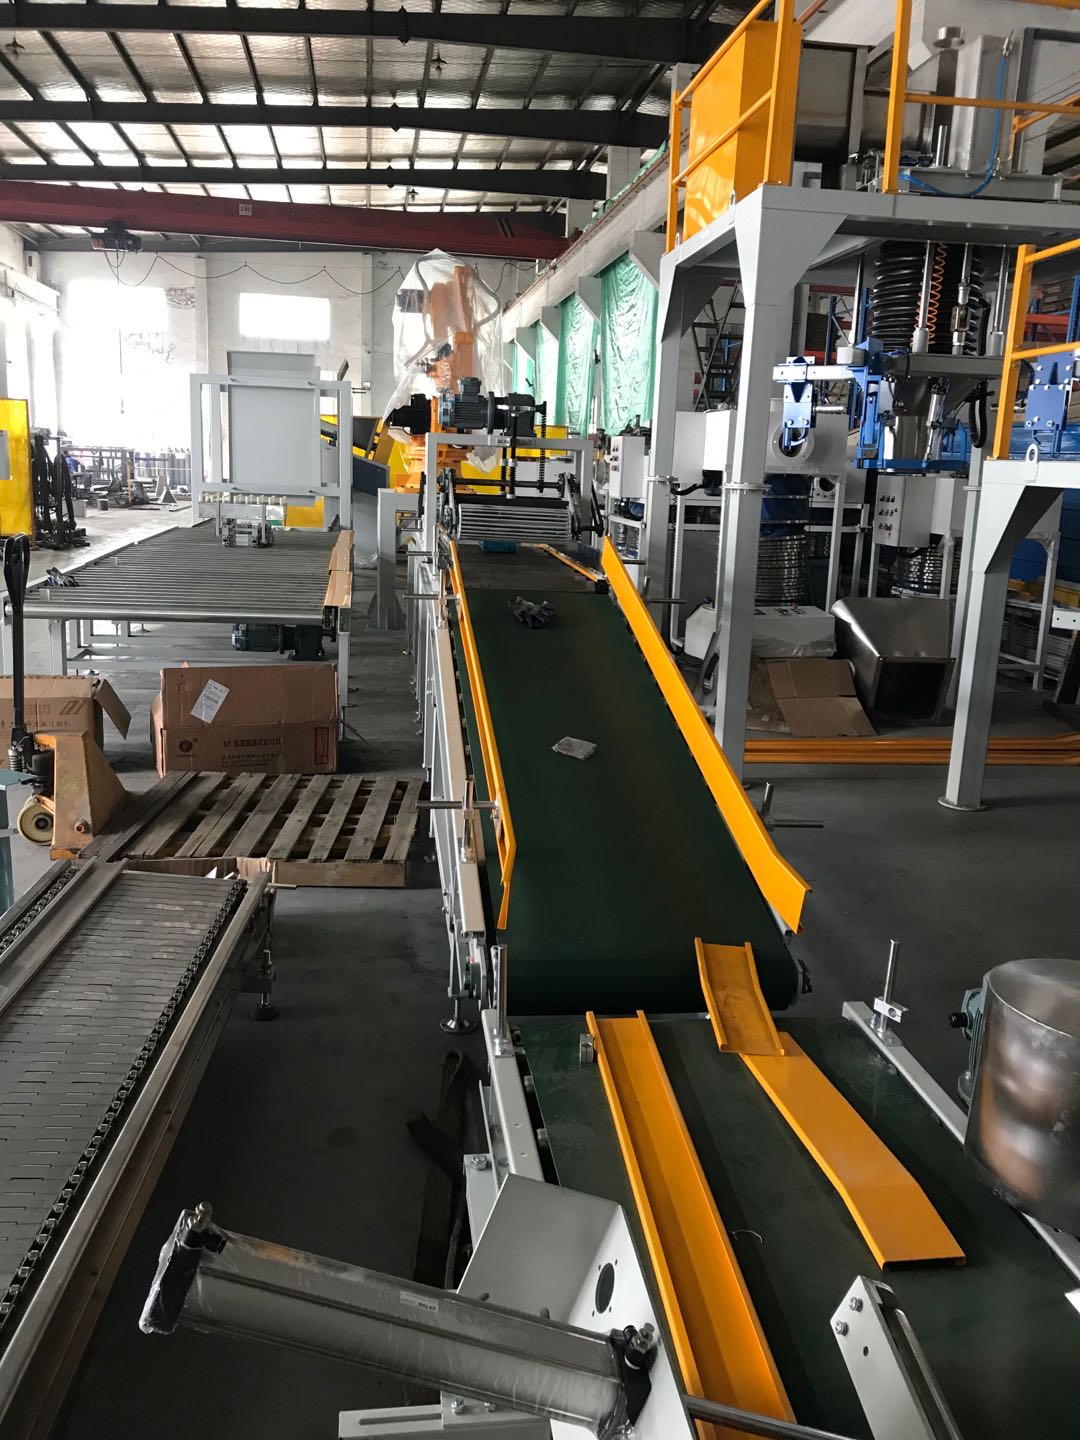 fully automatic bagging system Fully Automatic bagging Palletizing Line Fully Automatic Packing & Palletizing Line